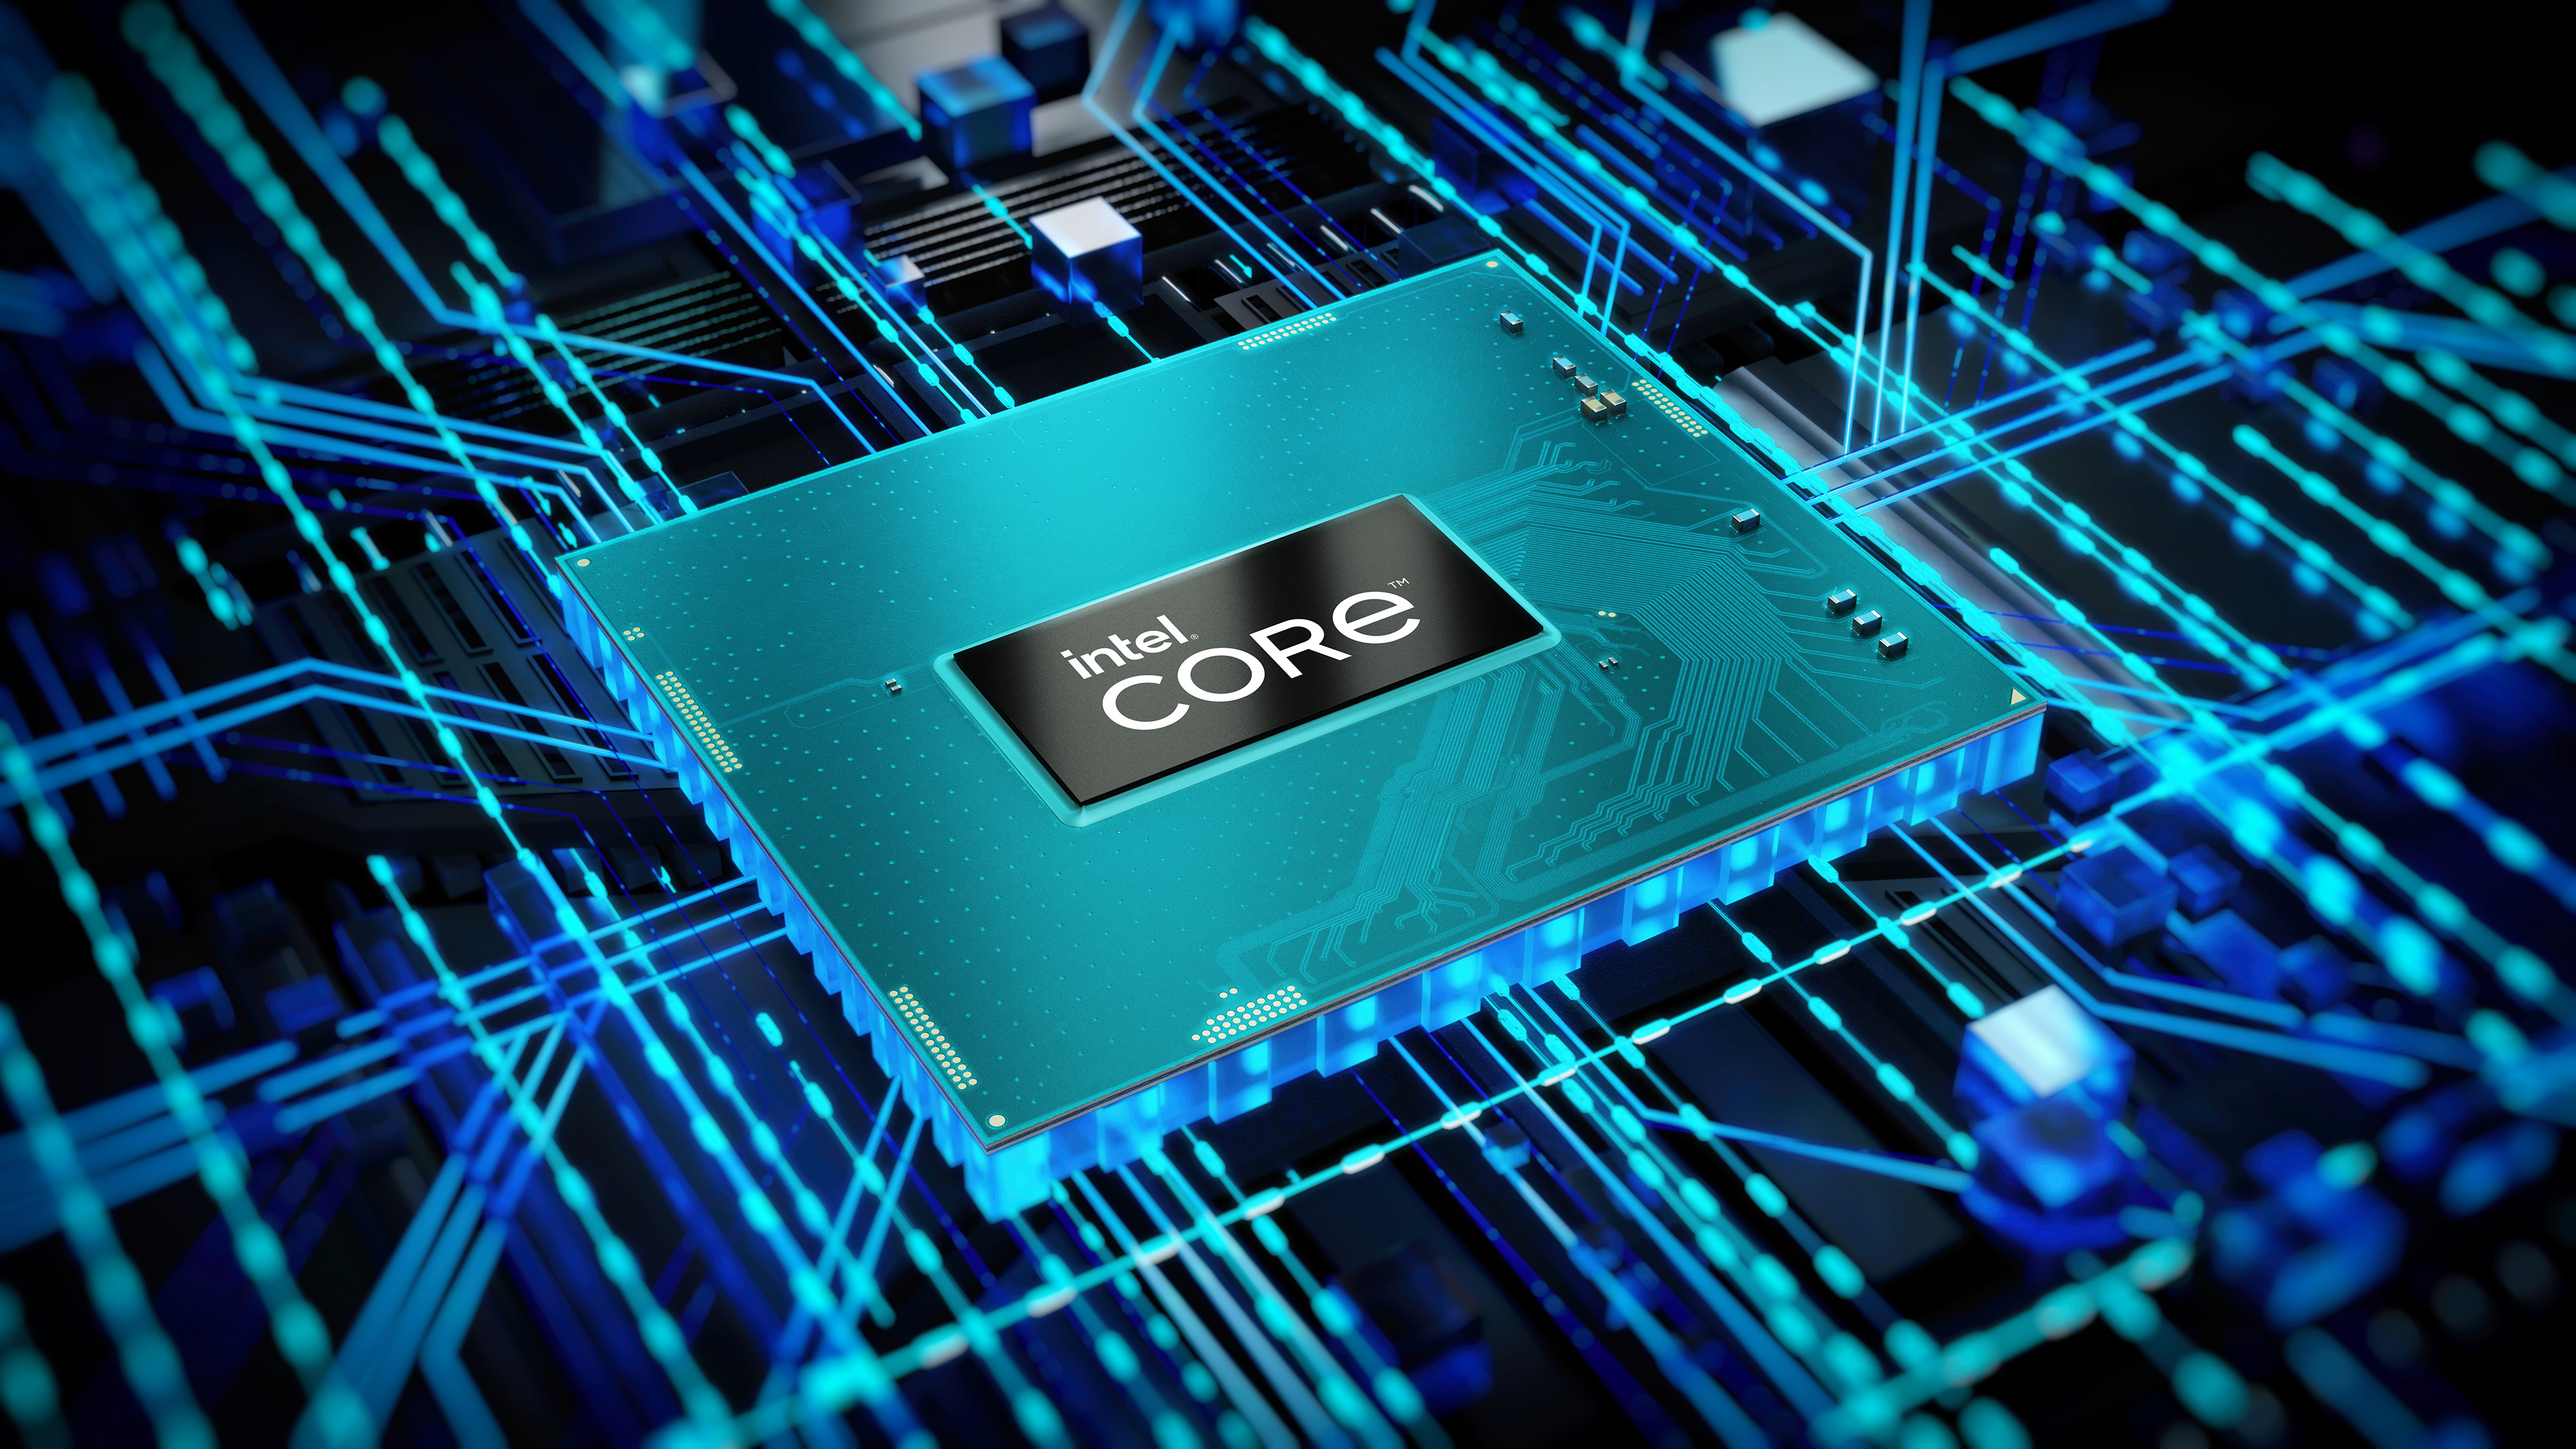 A mobile processor that reads “Intel Core” on a background of illuminated blue and green nodes.